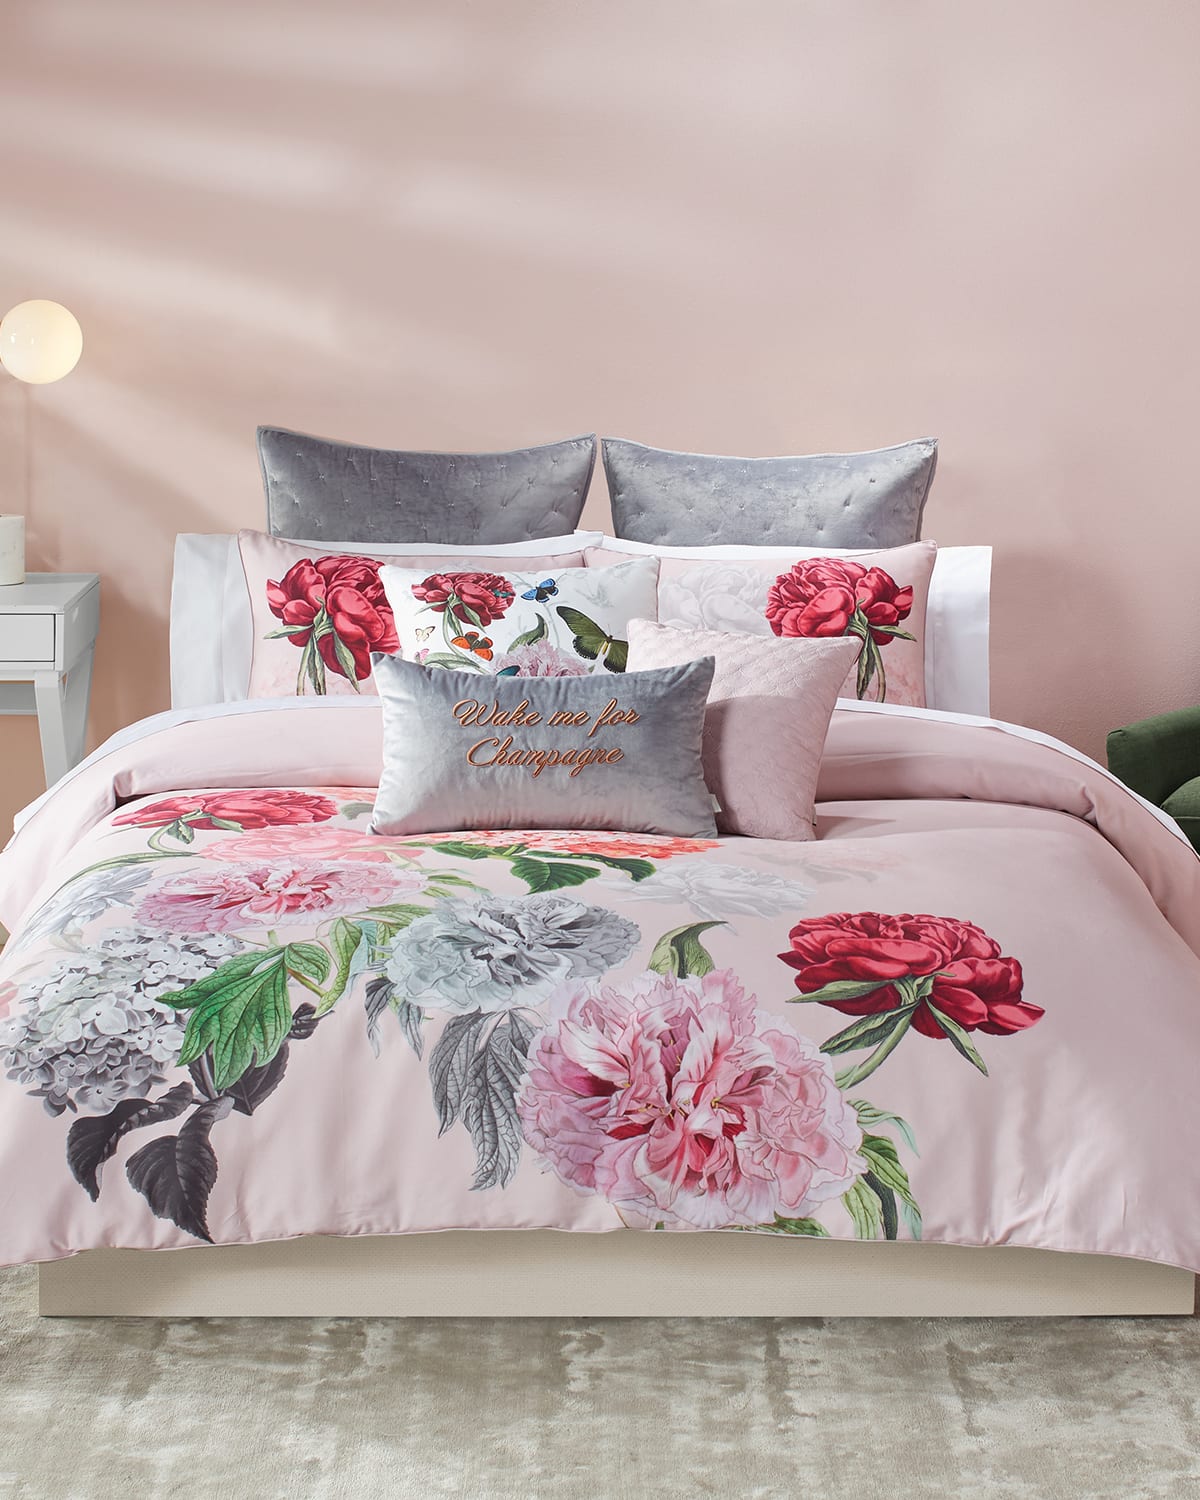 Image Ted Baker London Palace Gardens Full/Queen Comforter Set